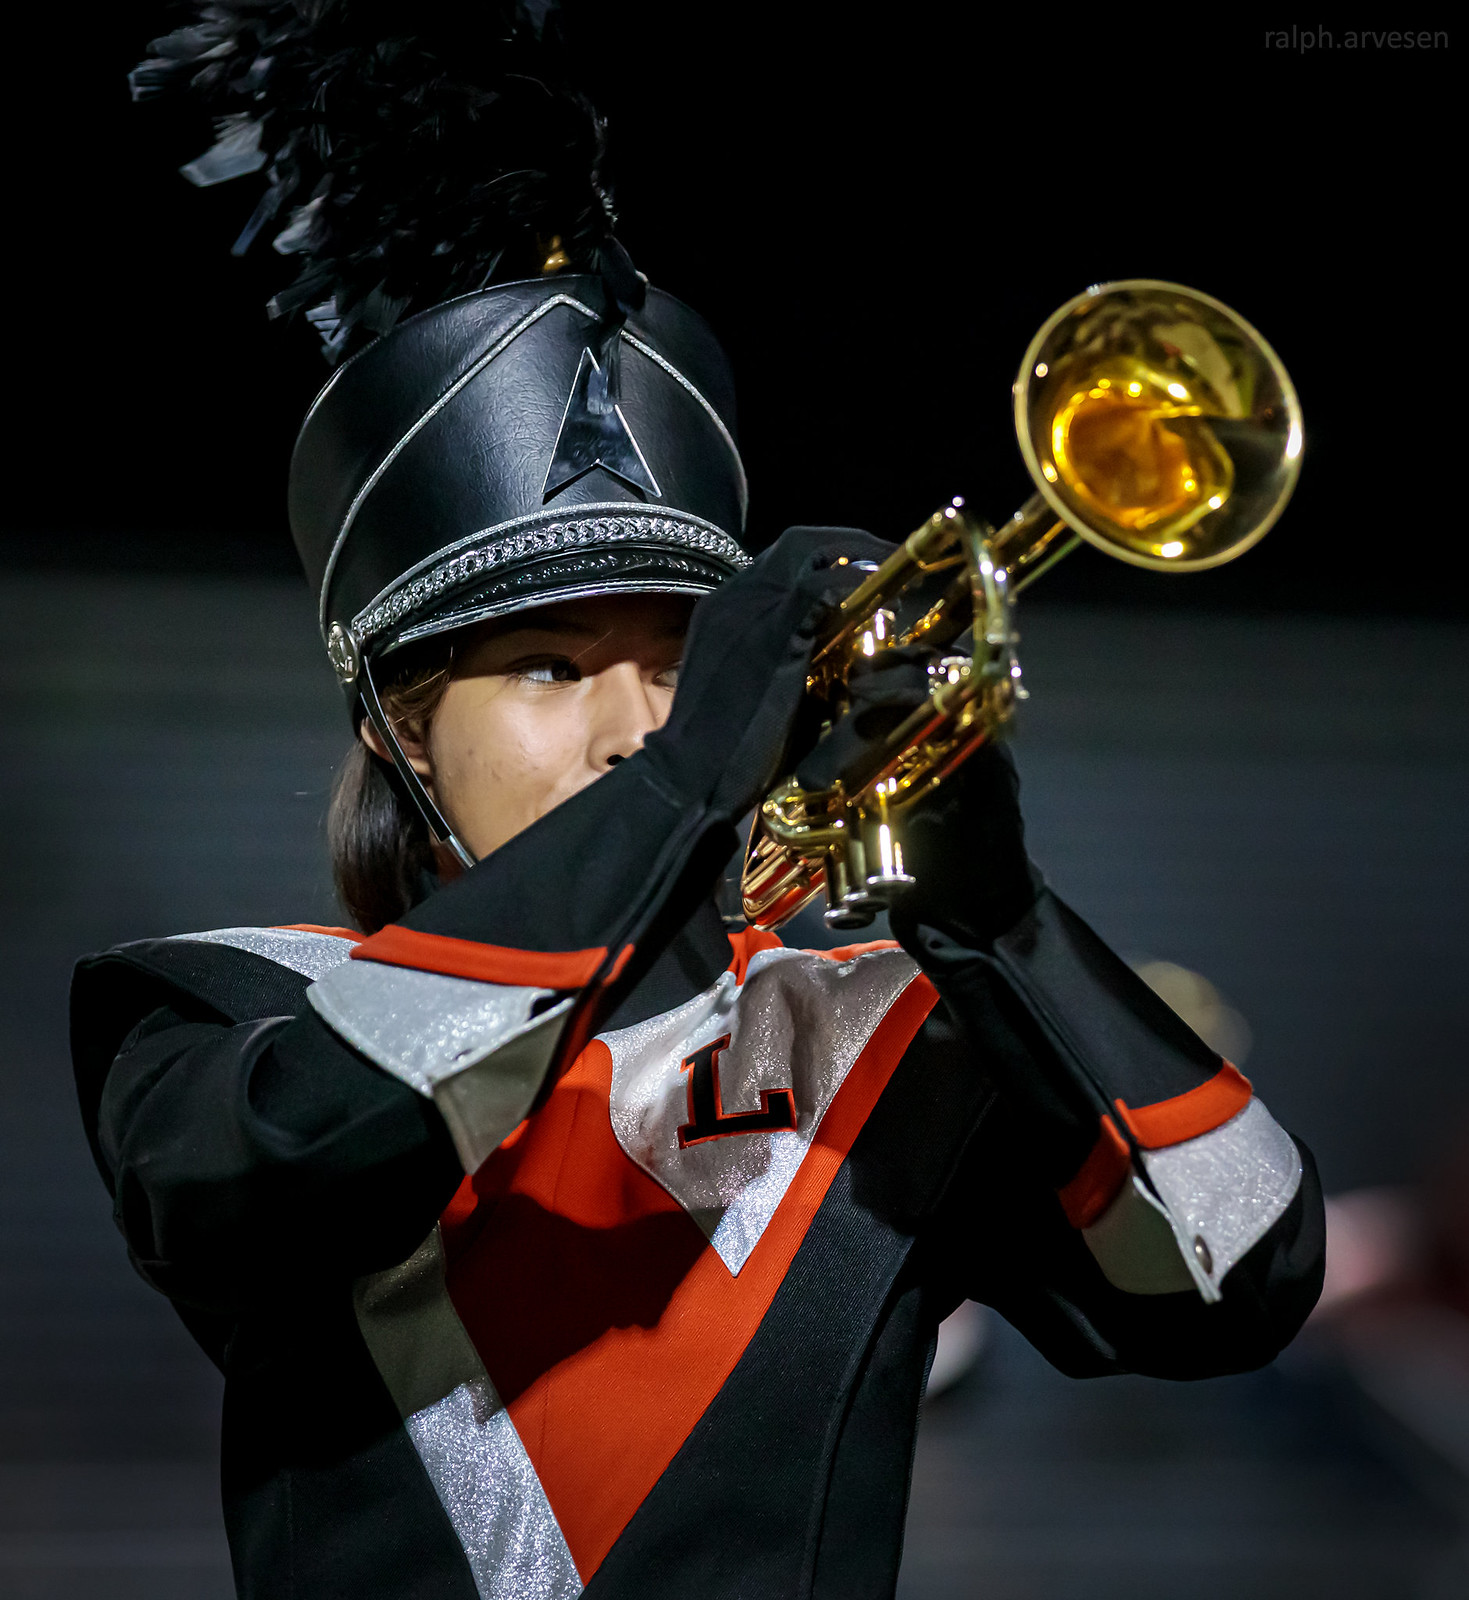 Llano Marching Band | Texas Review | Ralph Arvesen